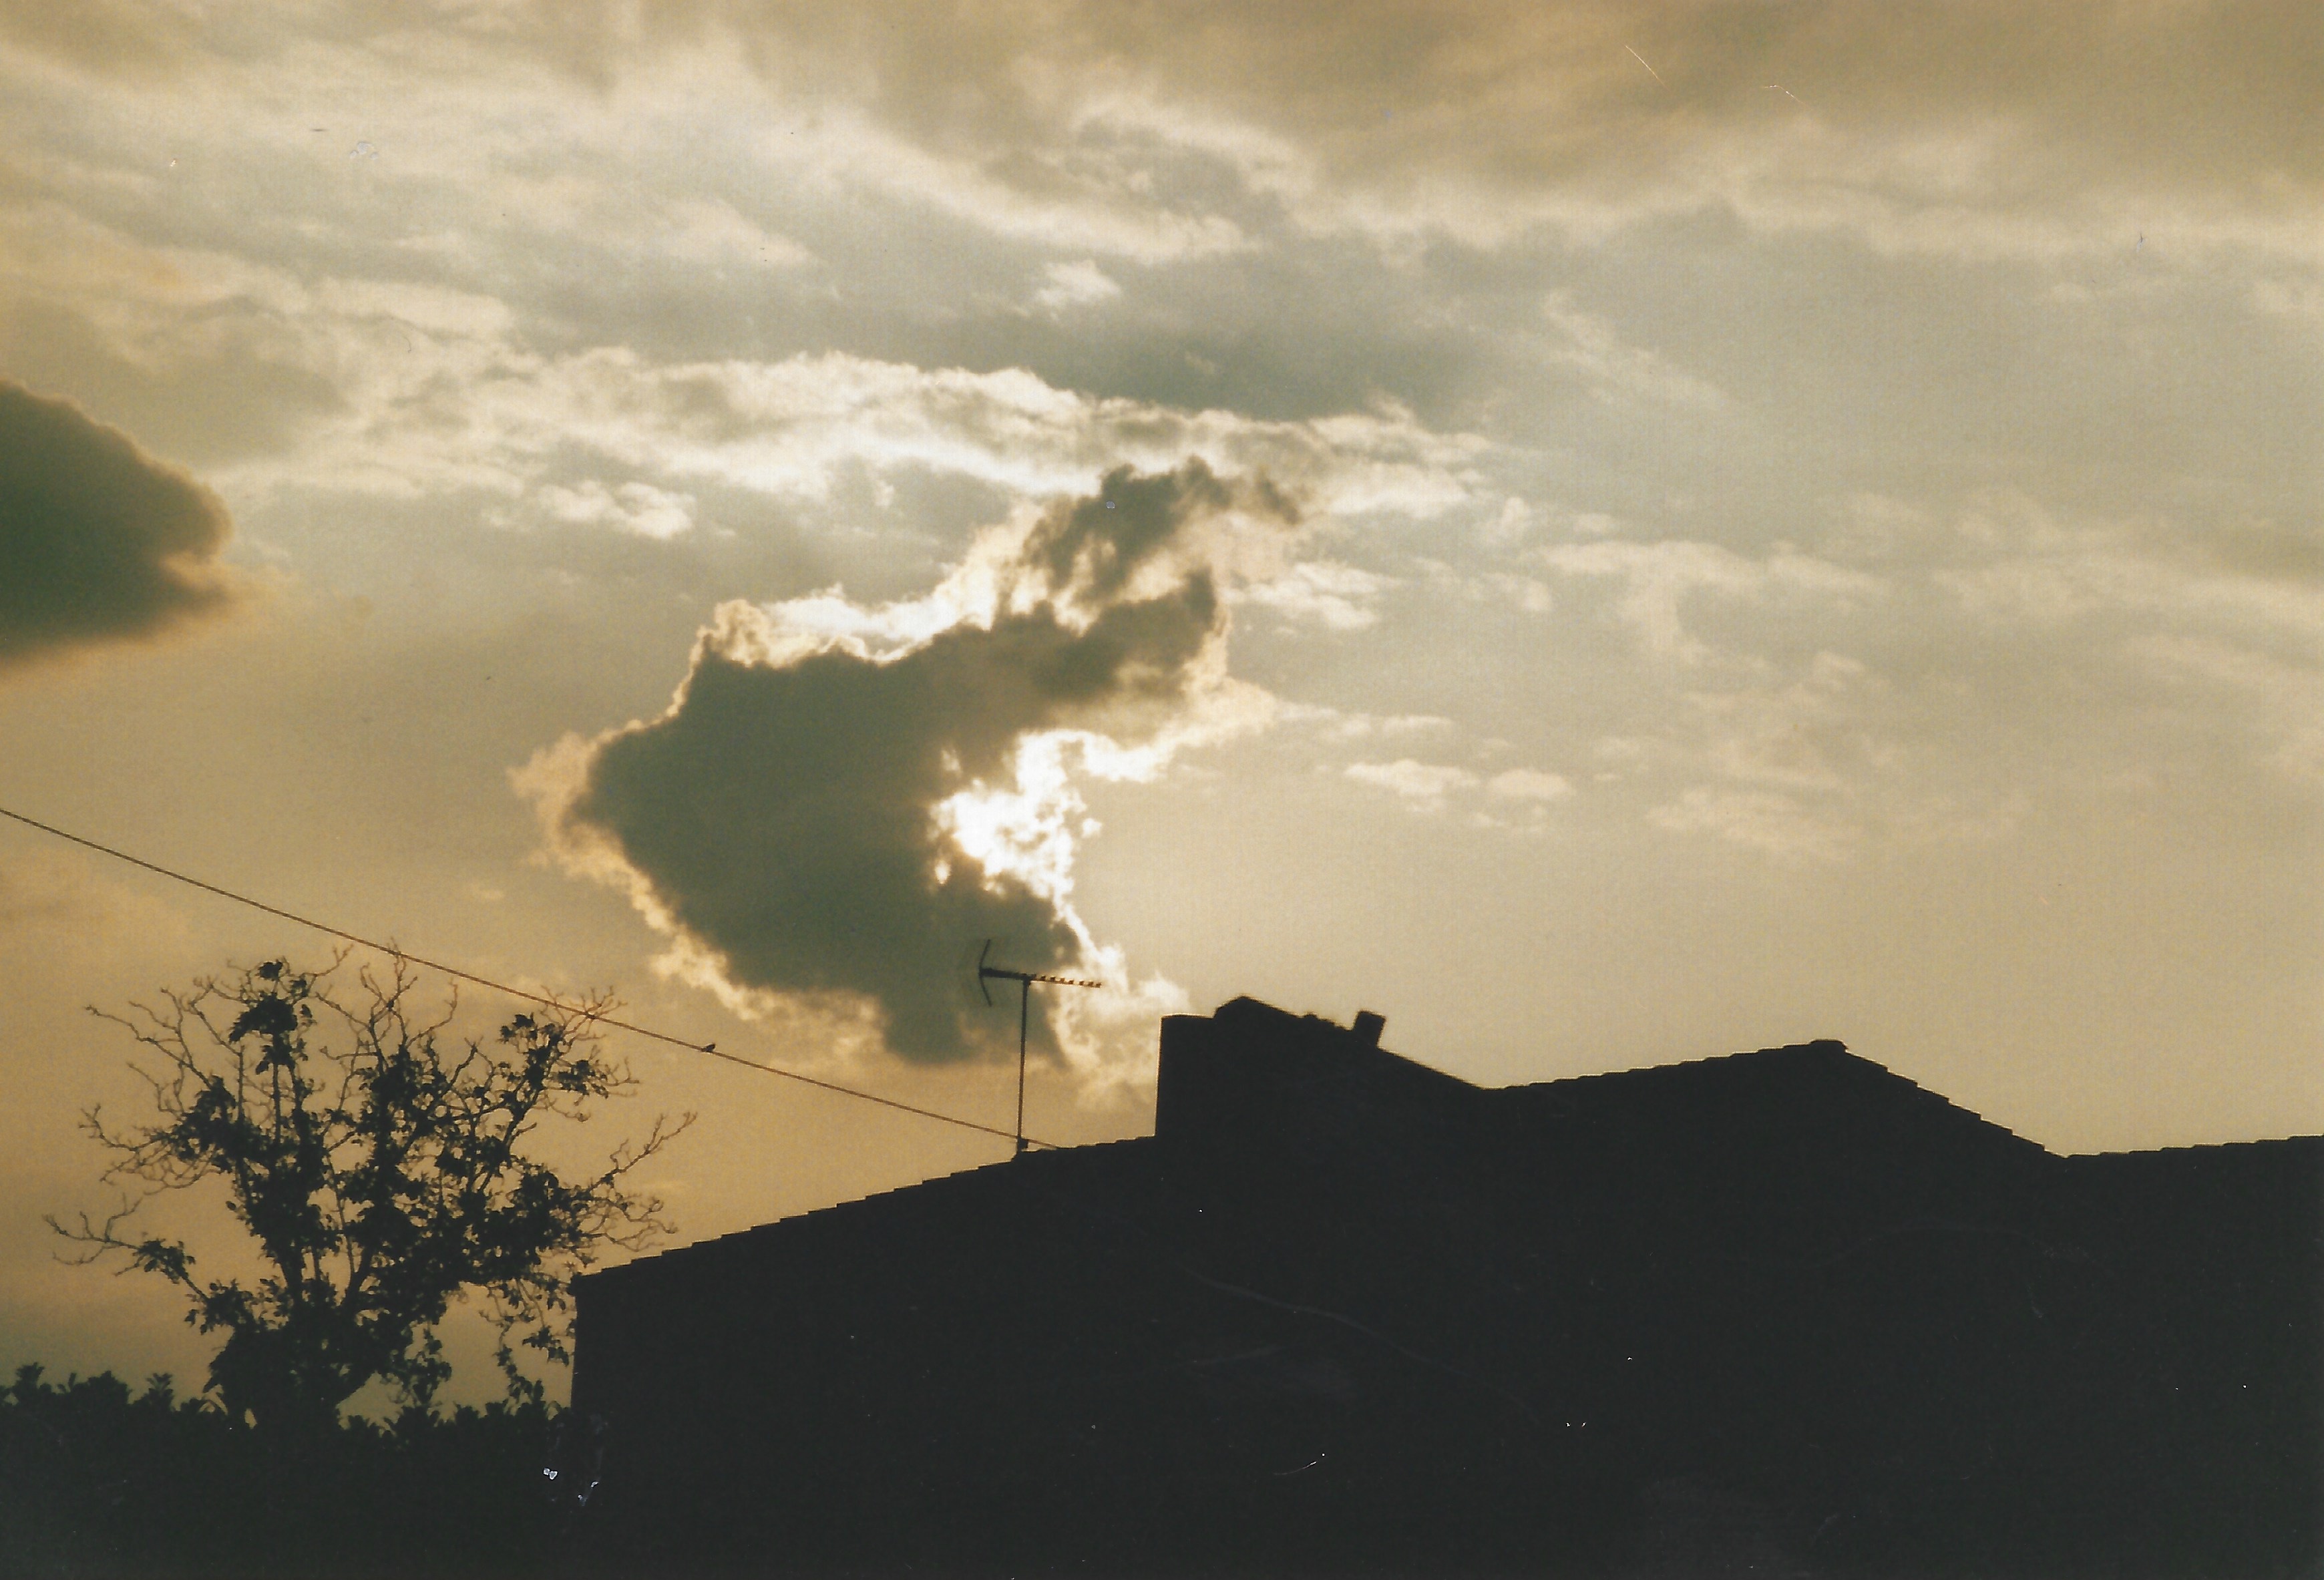 Old picture of a cloudy French sunset